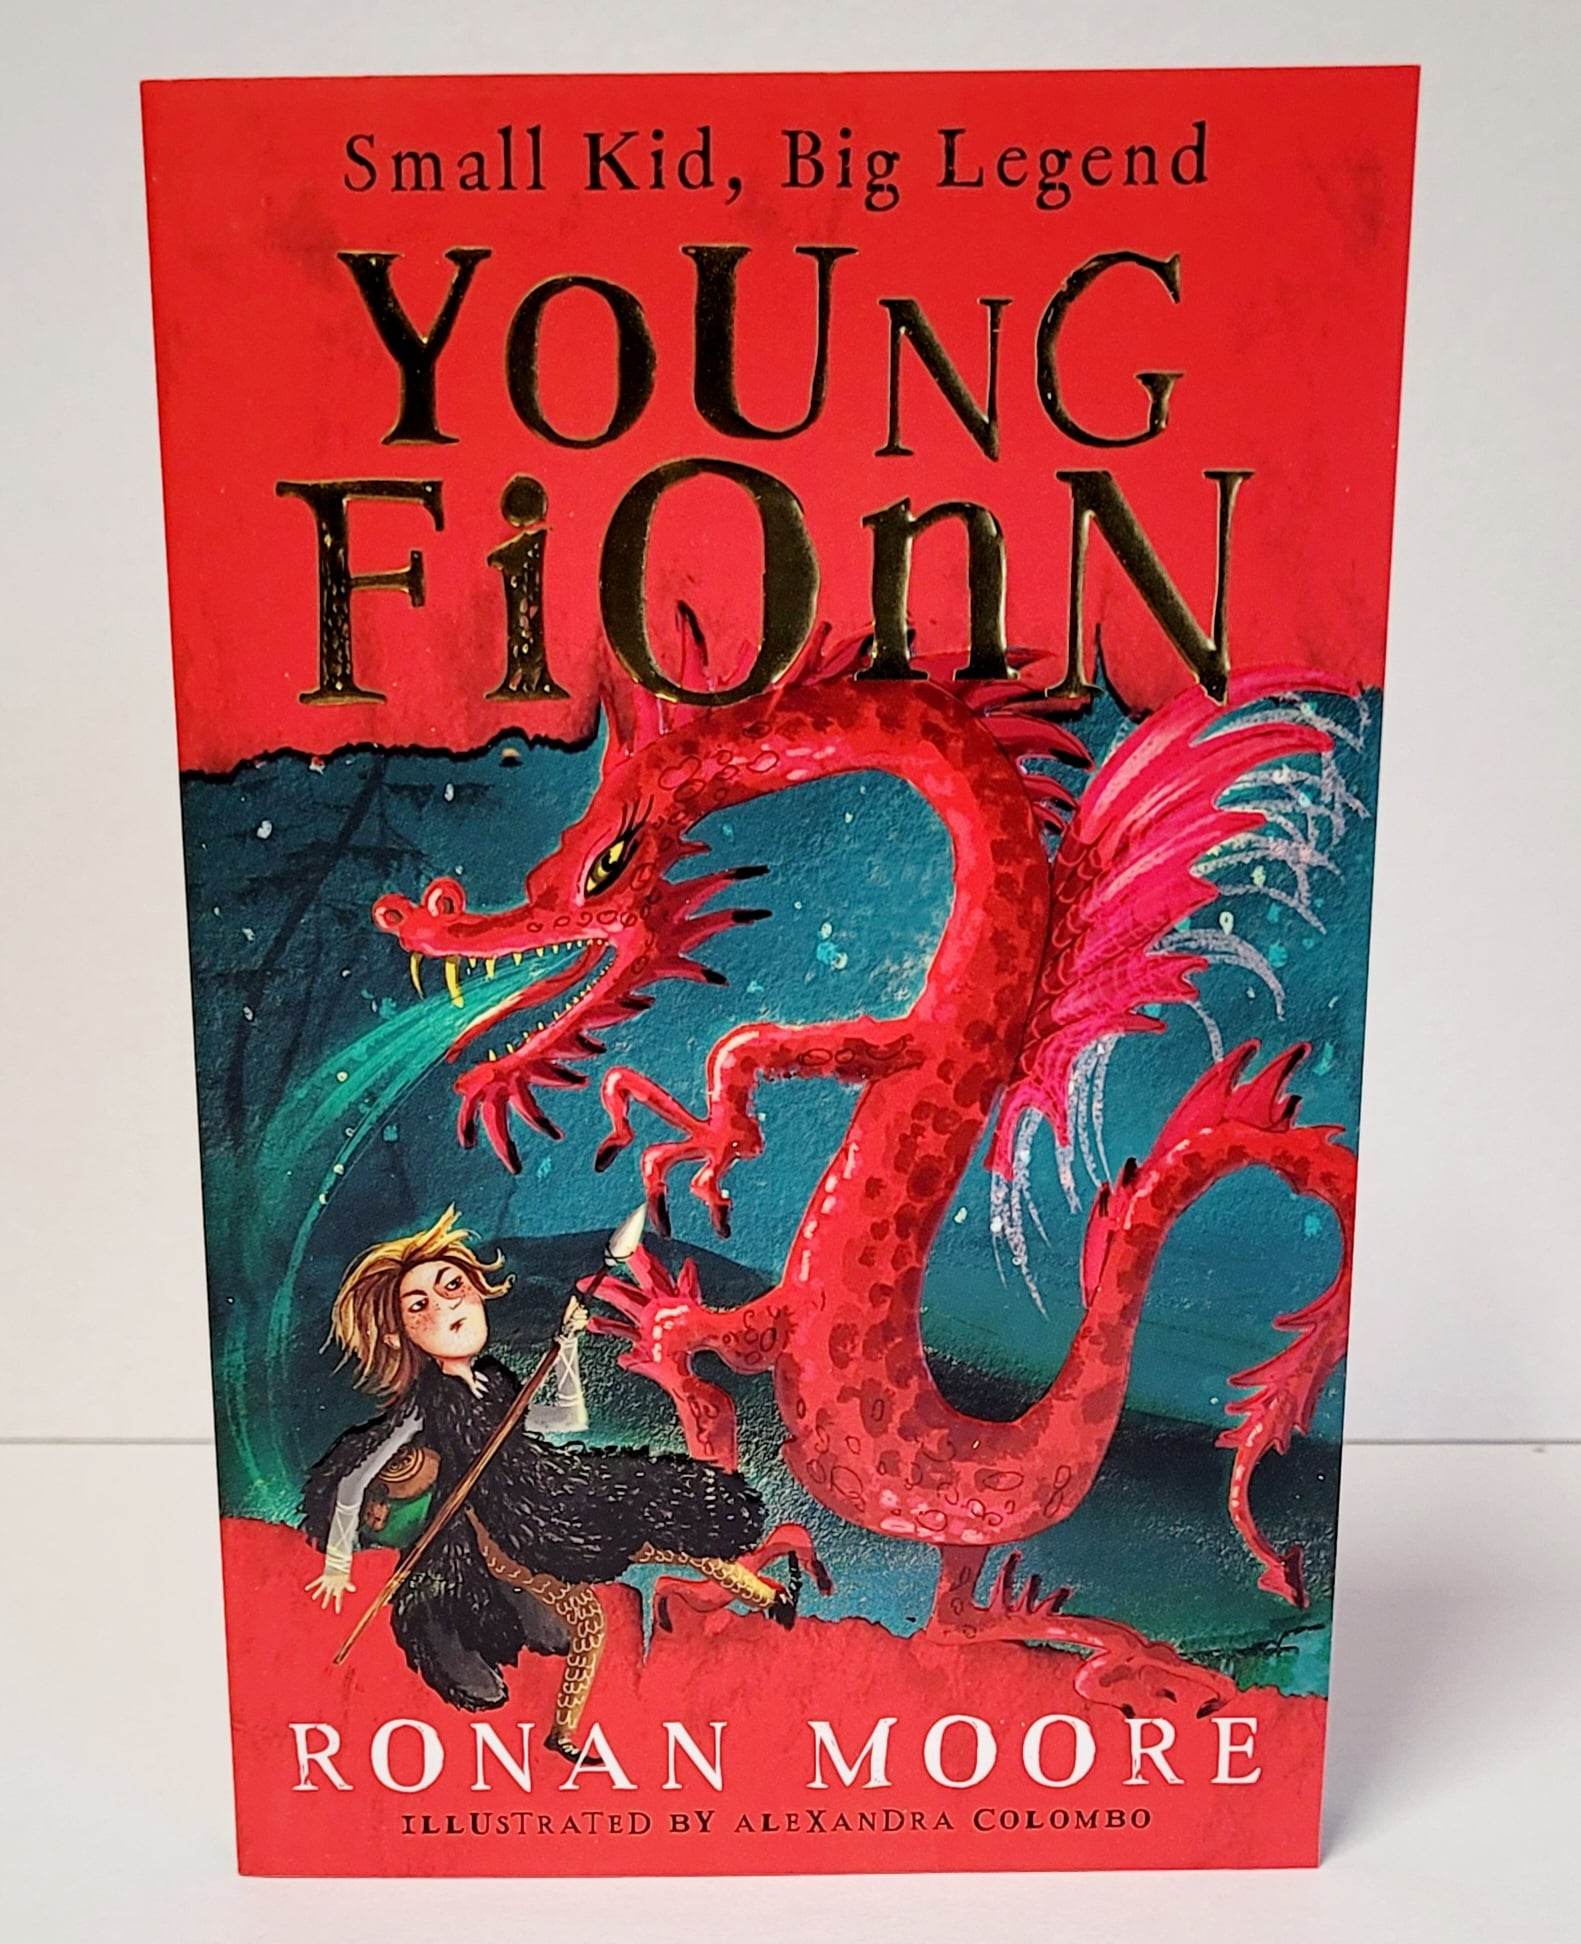 Young Fionn by Ronan Moore